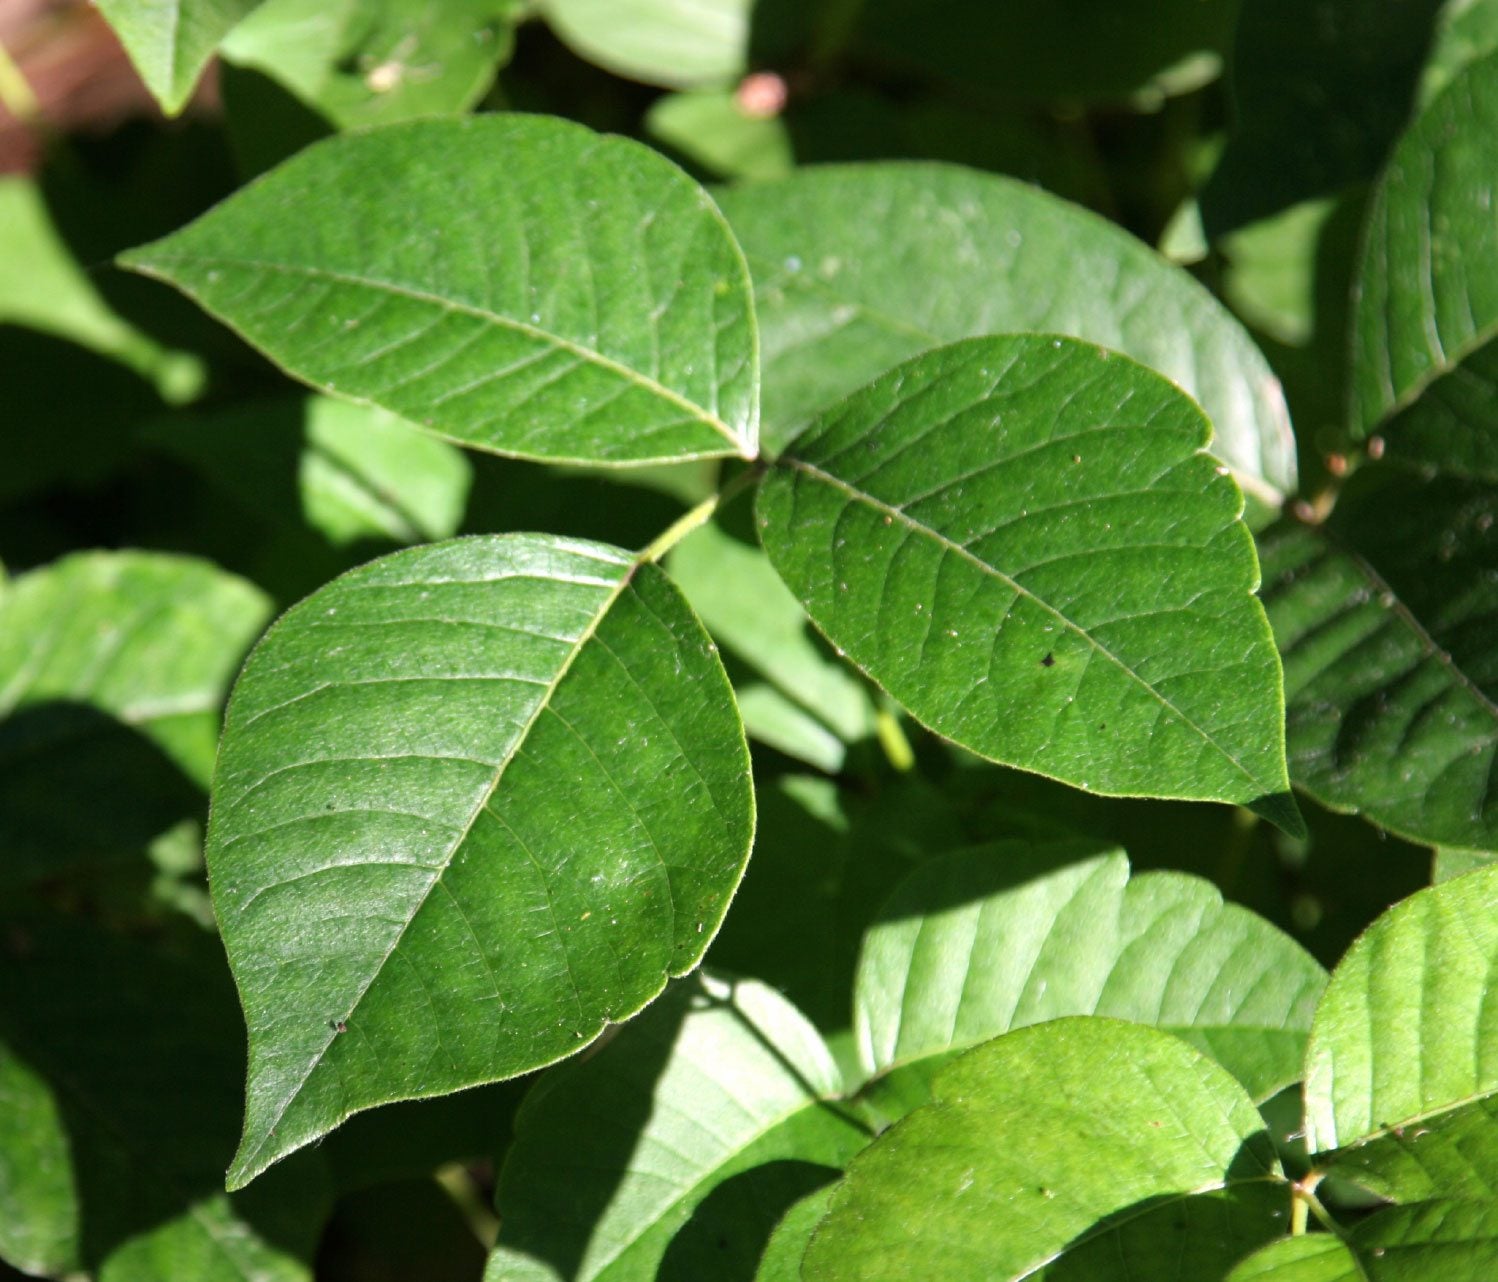 How To Kill Poison Ivy - Find Out What Is The Best Way To Get Rid